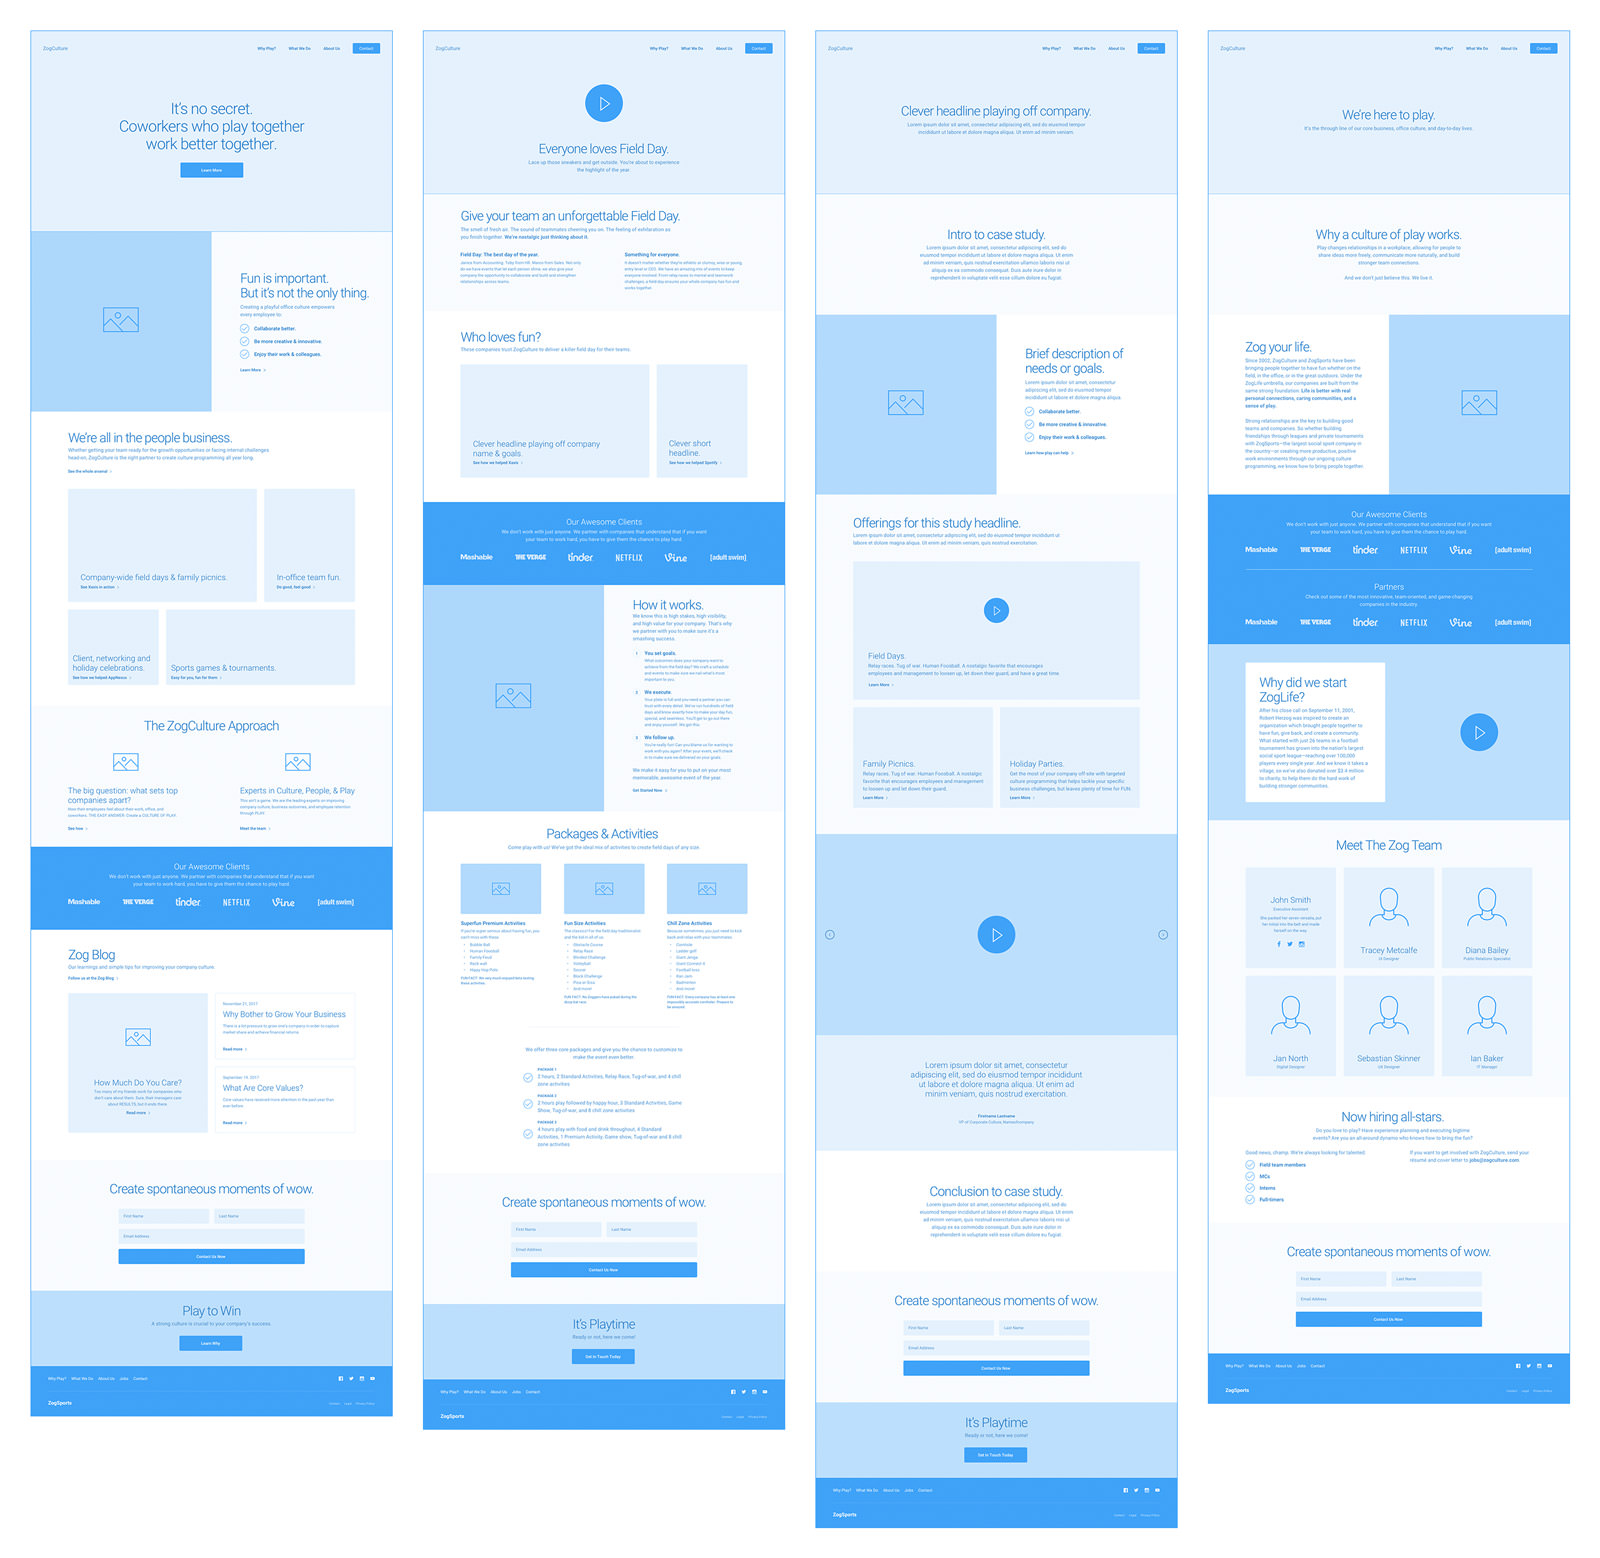 Wireframes laying out content hierarchy and modules for the ZogCulture site